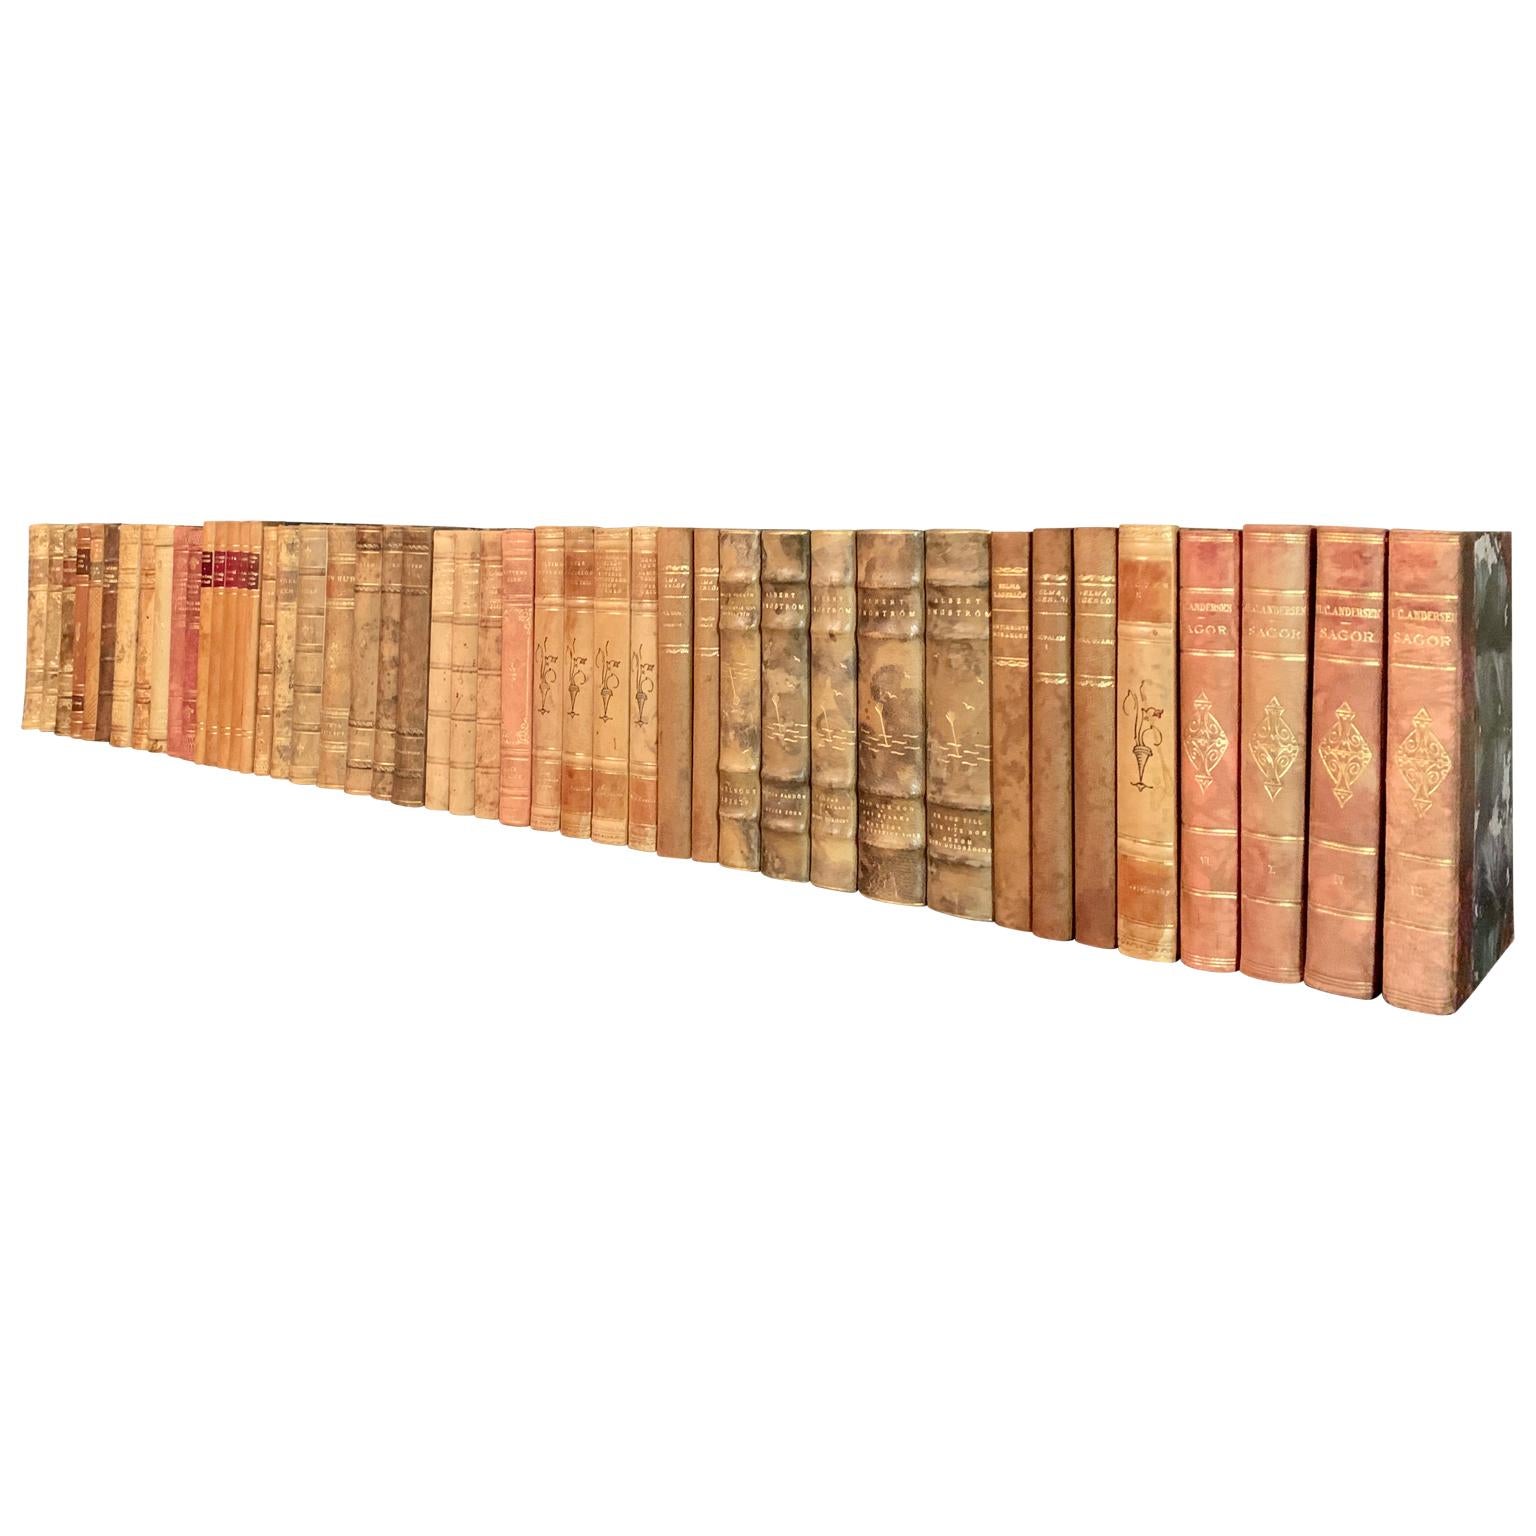 A collection of 45 Swedish decorative antique leather-bound library books

This lot of books on literature from Sweden are wrapped in beautiful vintage leather-bound covers, comprised of a selection of warm tones and gold leaf print embossing. The